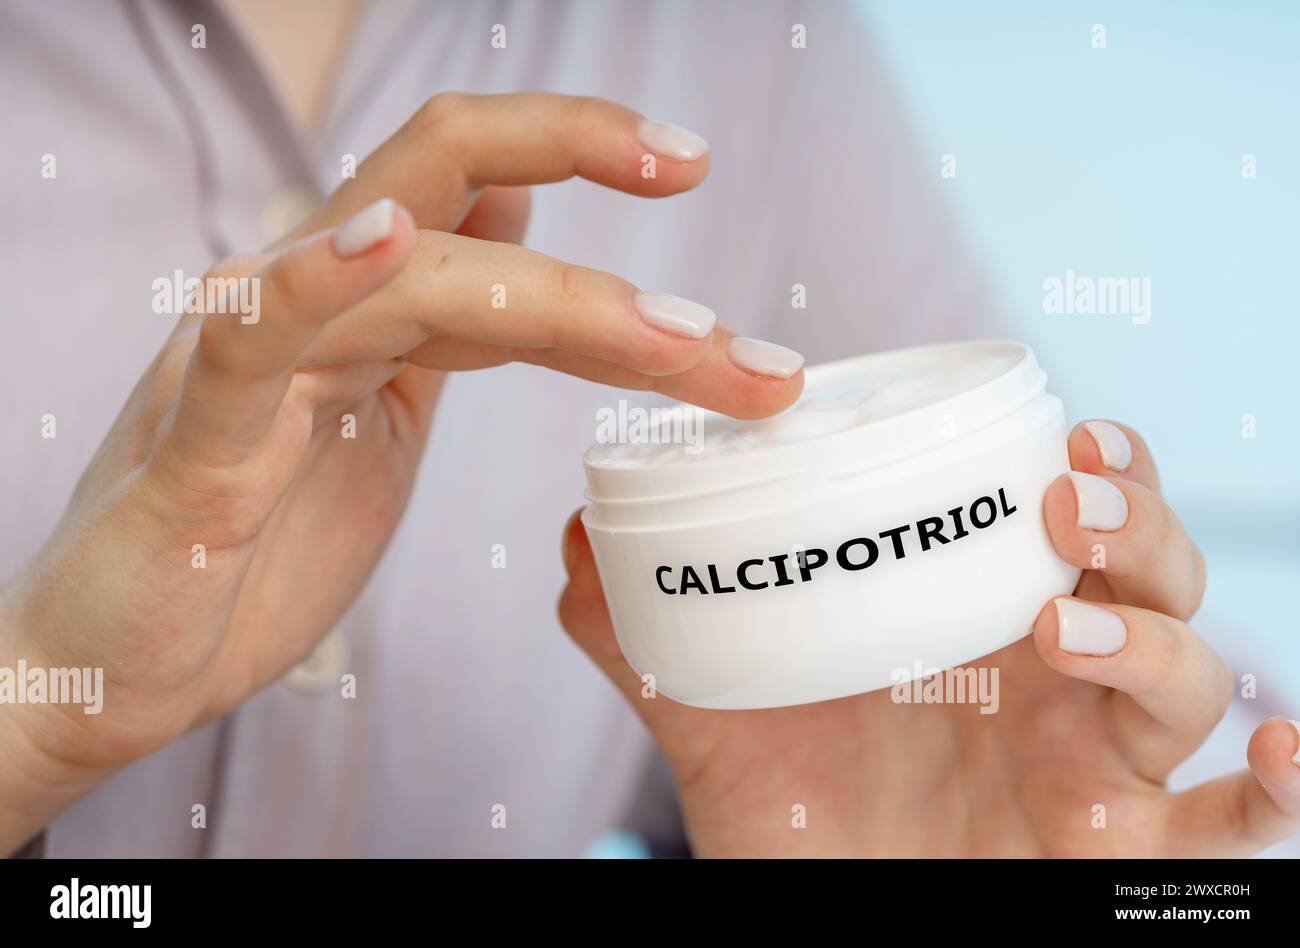 Calcipotriol medical cream, conceptual image. A synthetic form of vitamin D used in cream form to treat psoriasis by slowing down the growth of skin cells. Stock Photo